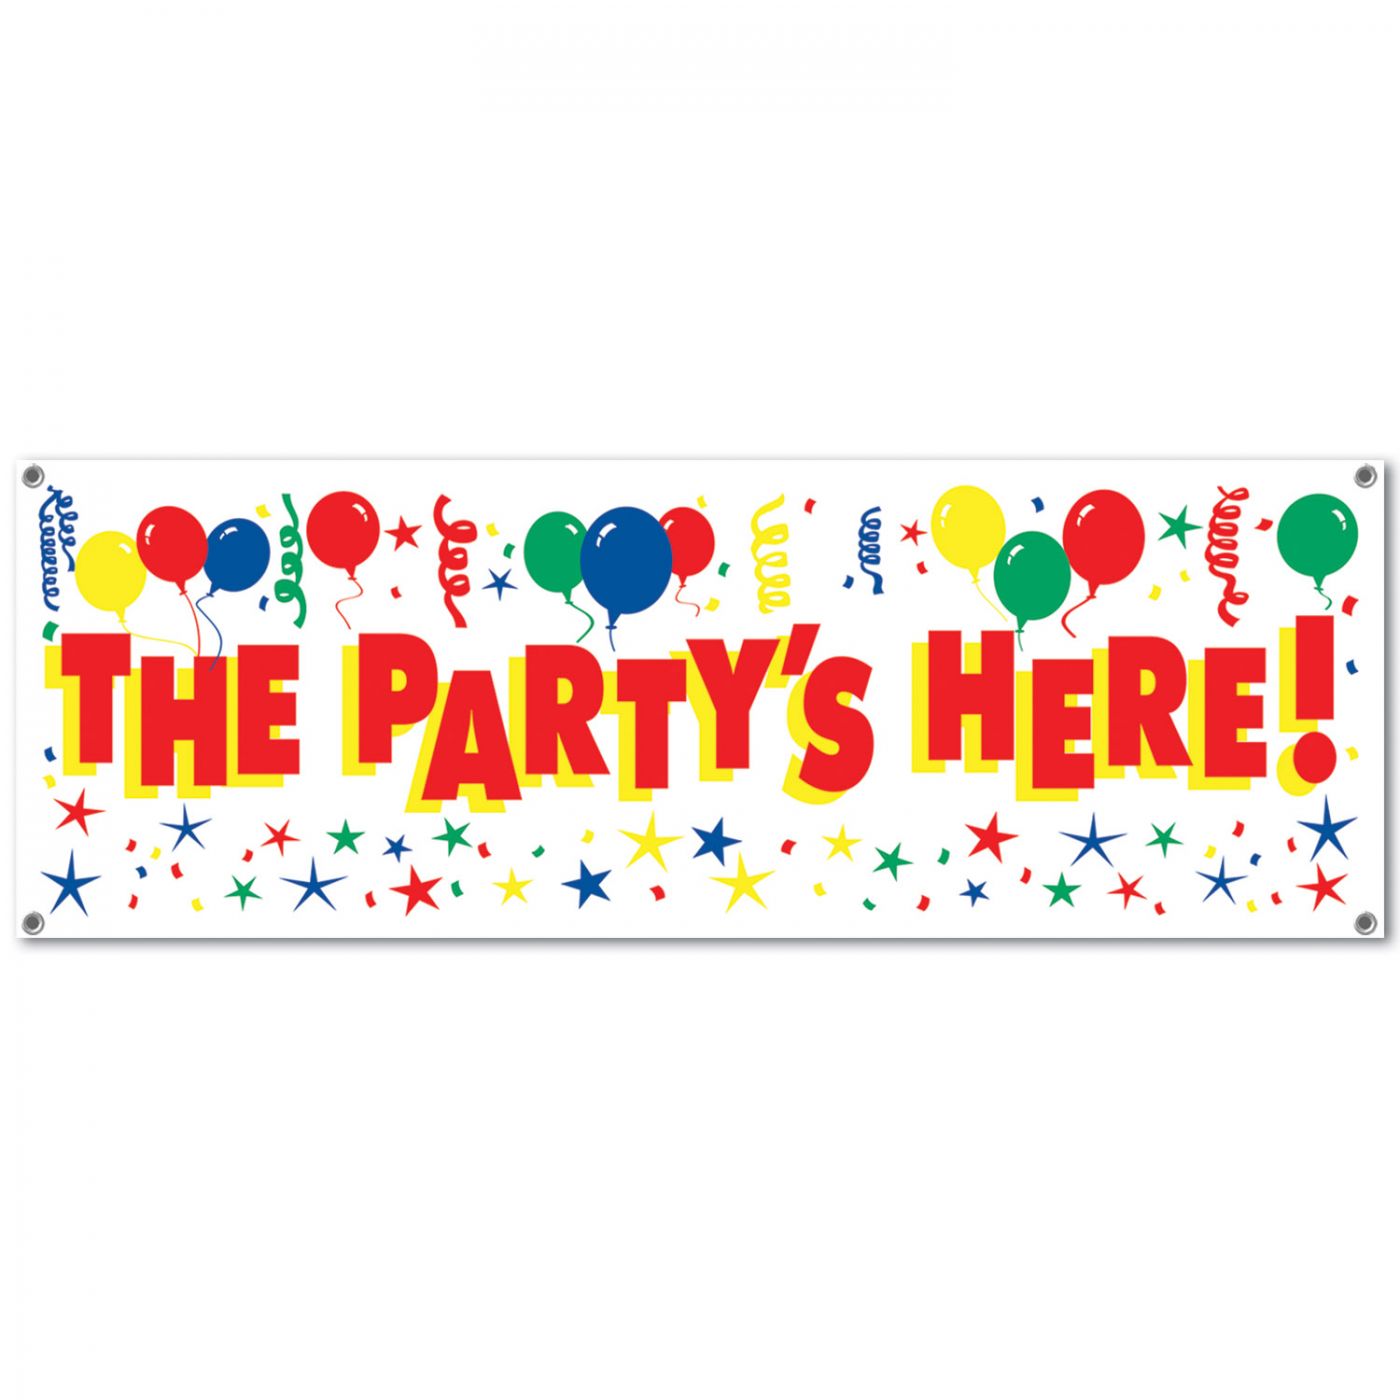 The Party's Here! Sign Banner (12) image